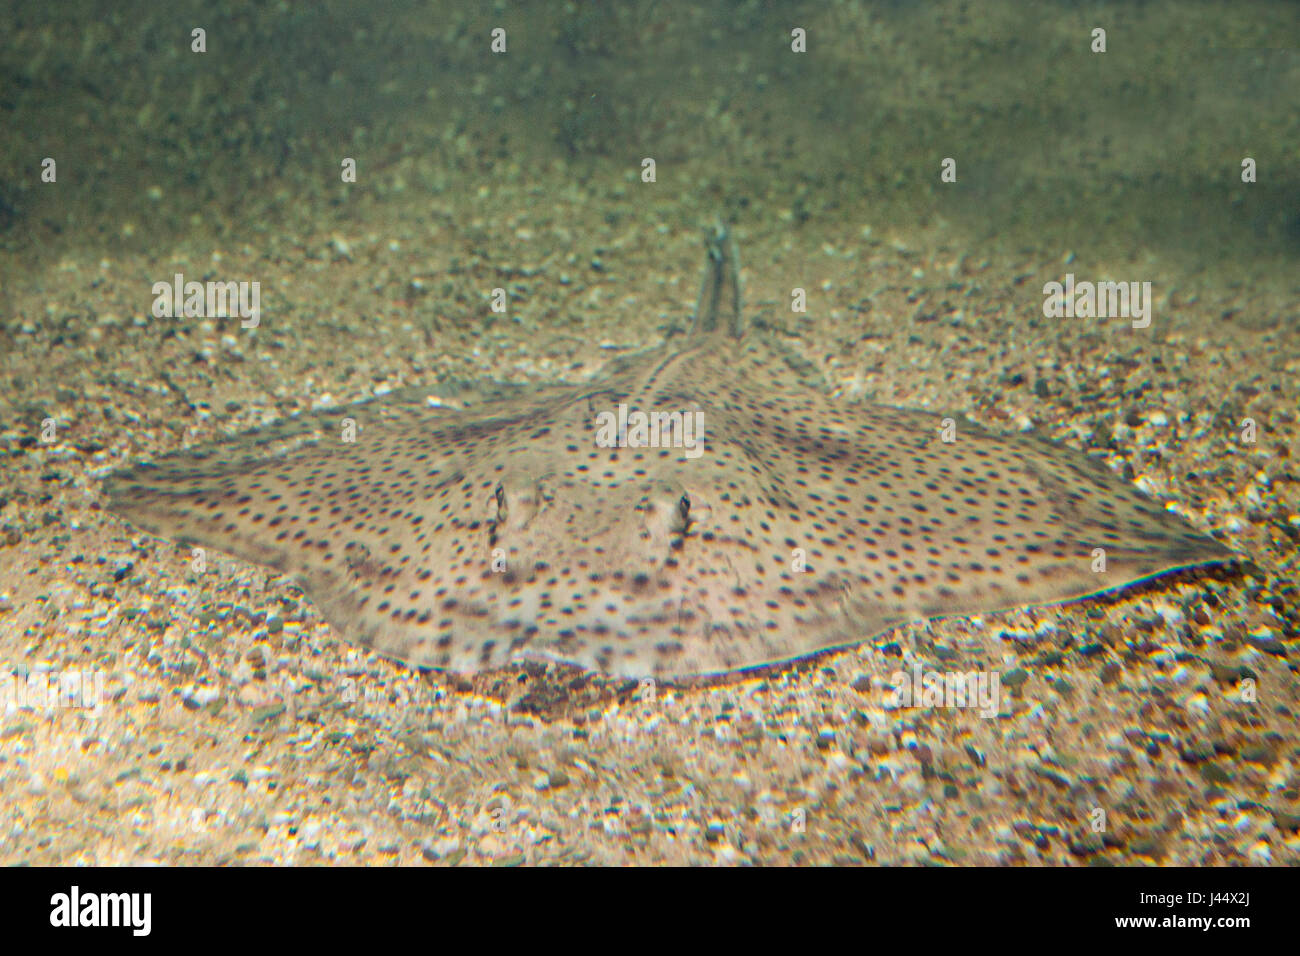 photo of a well camouflaged spotted ray Stock Photo